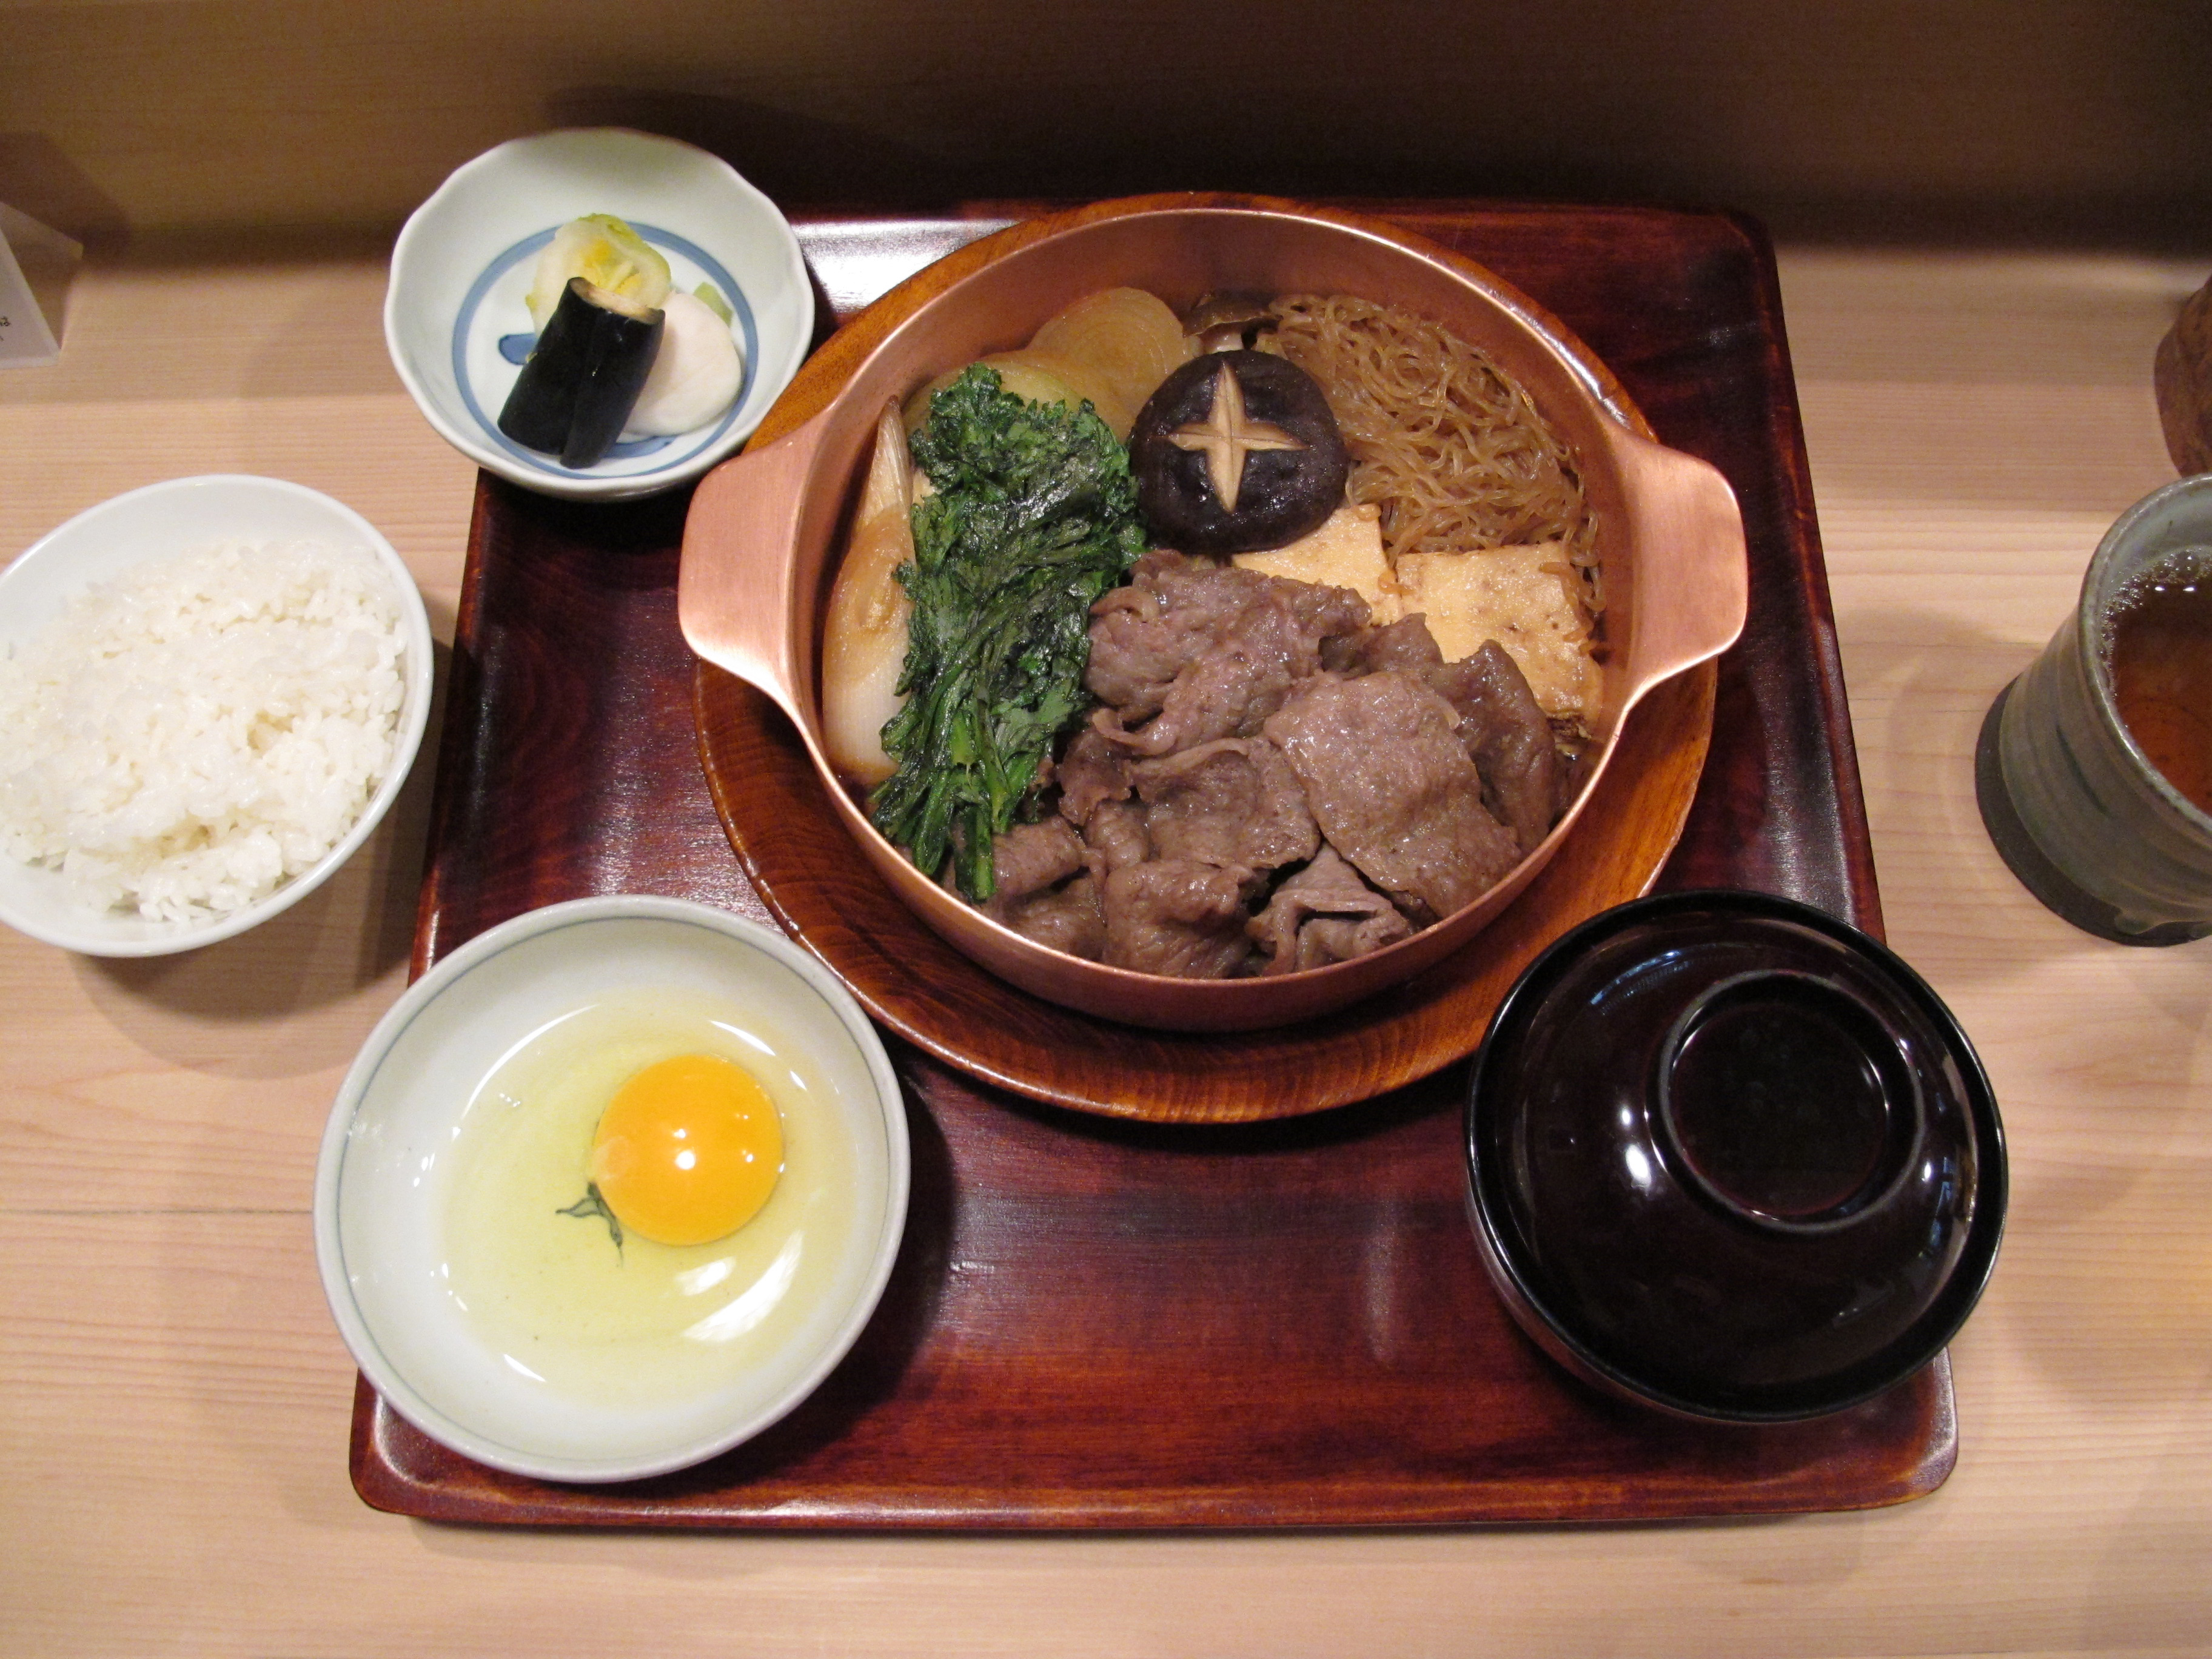 Tastes like a bargain: Though an evening at exclusive Moto-Akasaka restaurant Yoshihashi will likely set you back &#165;20,000 a head, its lunch menu offers sukiyaki and all the trimmings at just &#165;2,100. | ROBBIE SWINNERTON